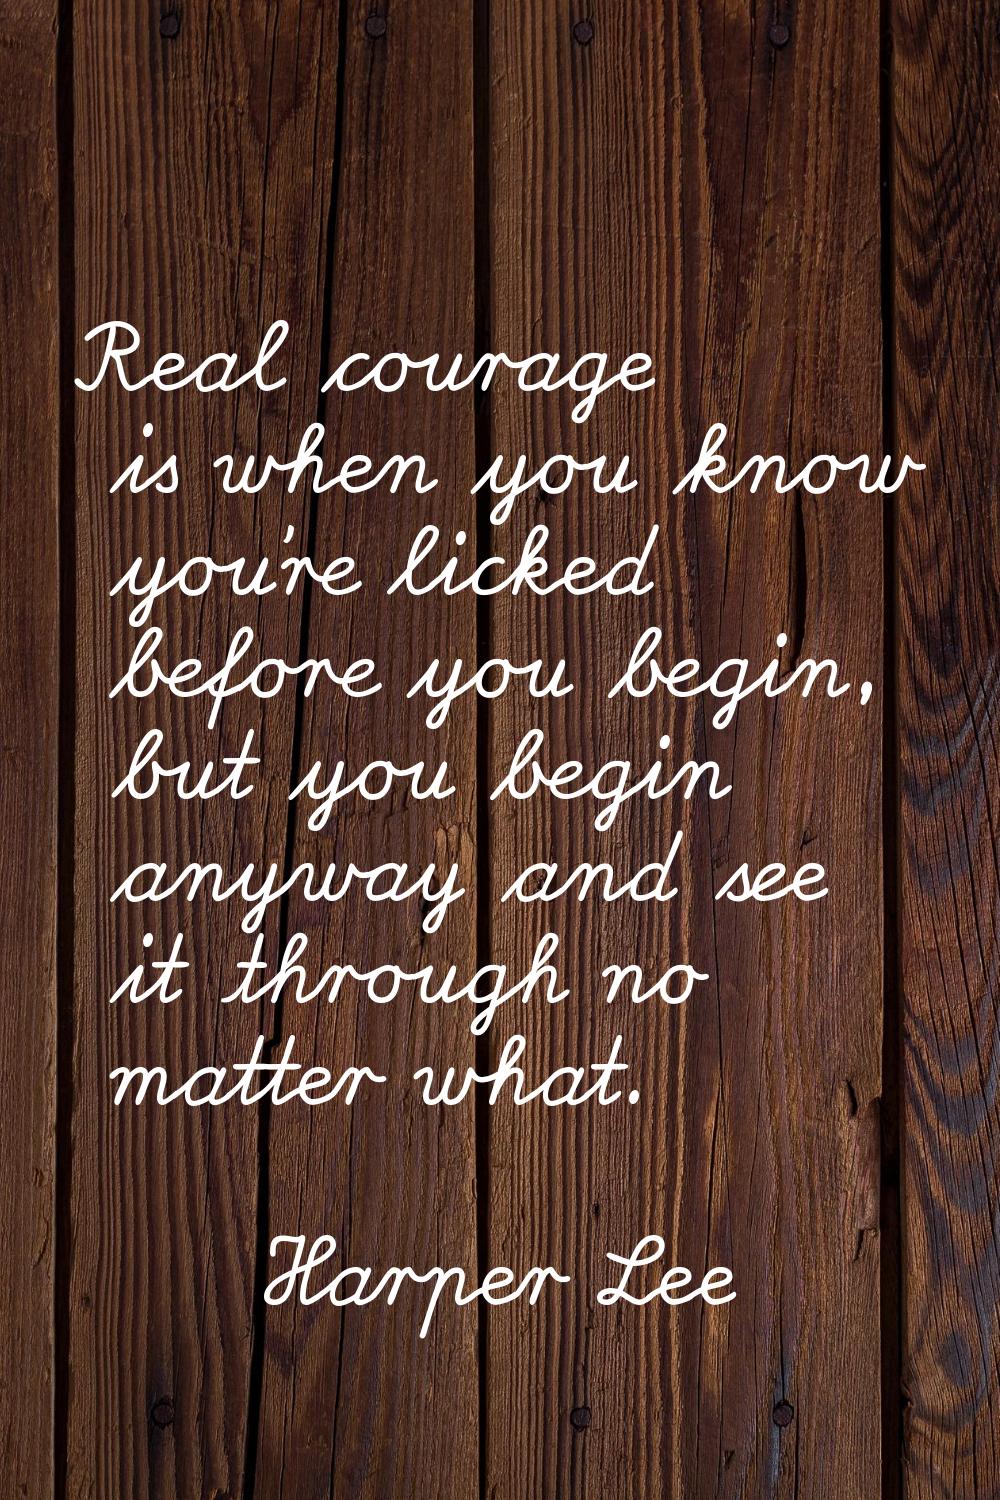 Real courage is when you know you're licked before you begin, but you begin anyway and see it throu